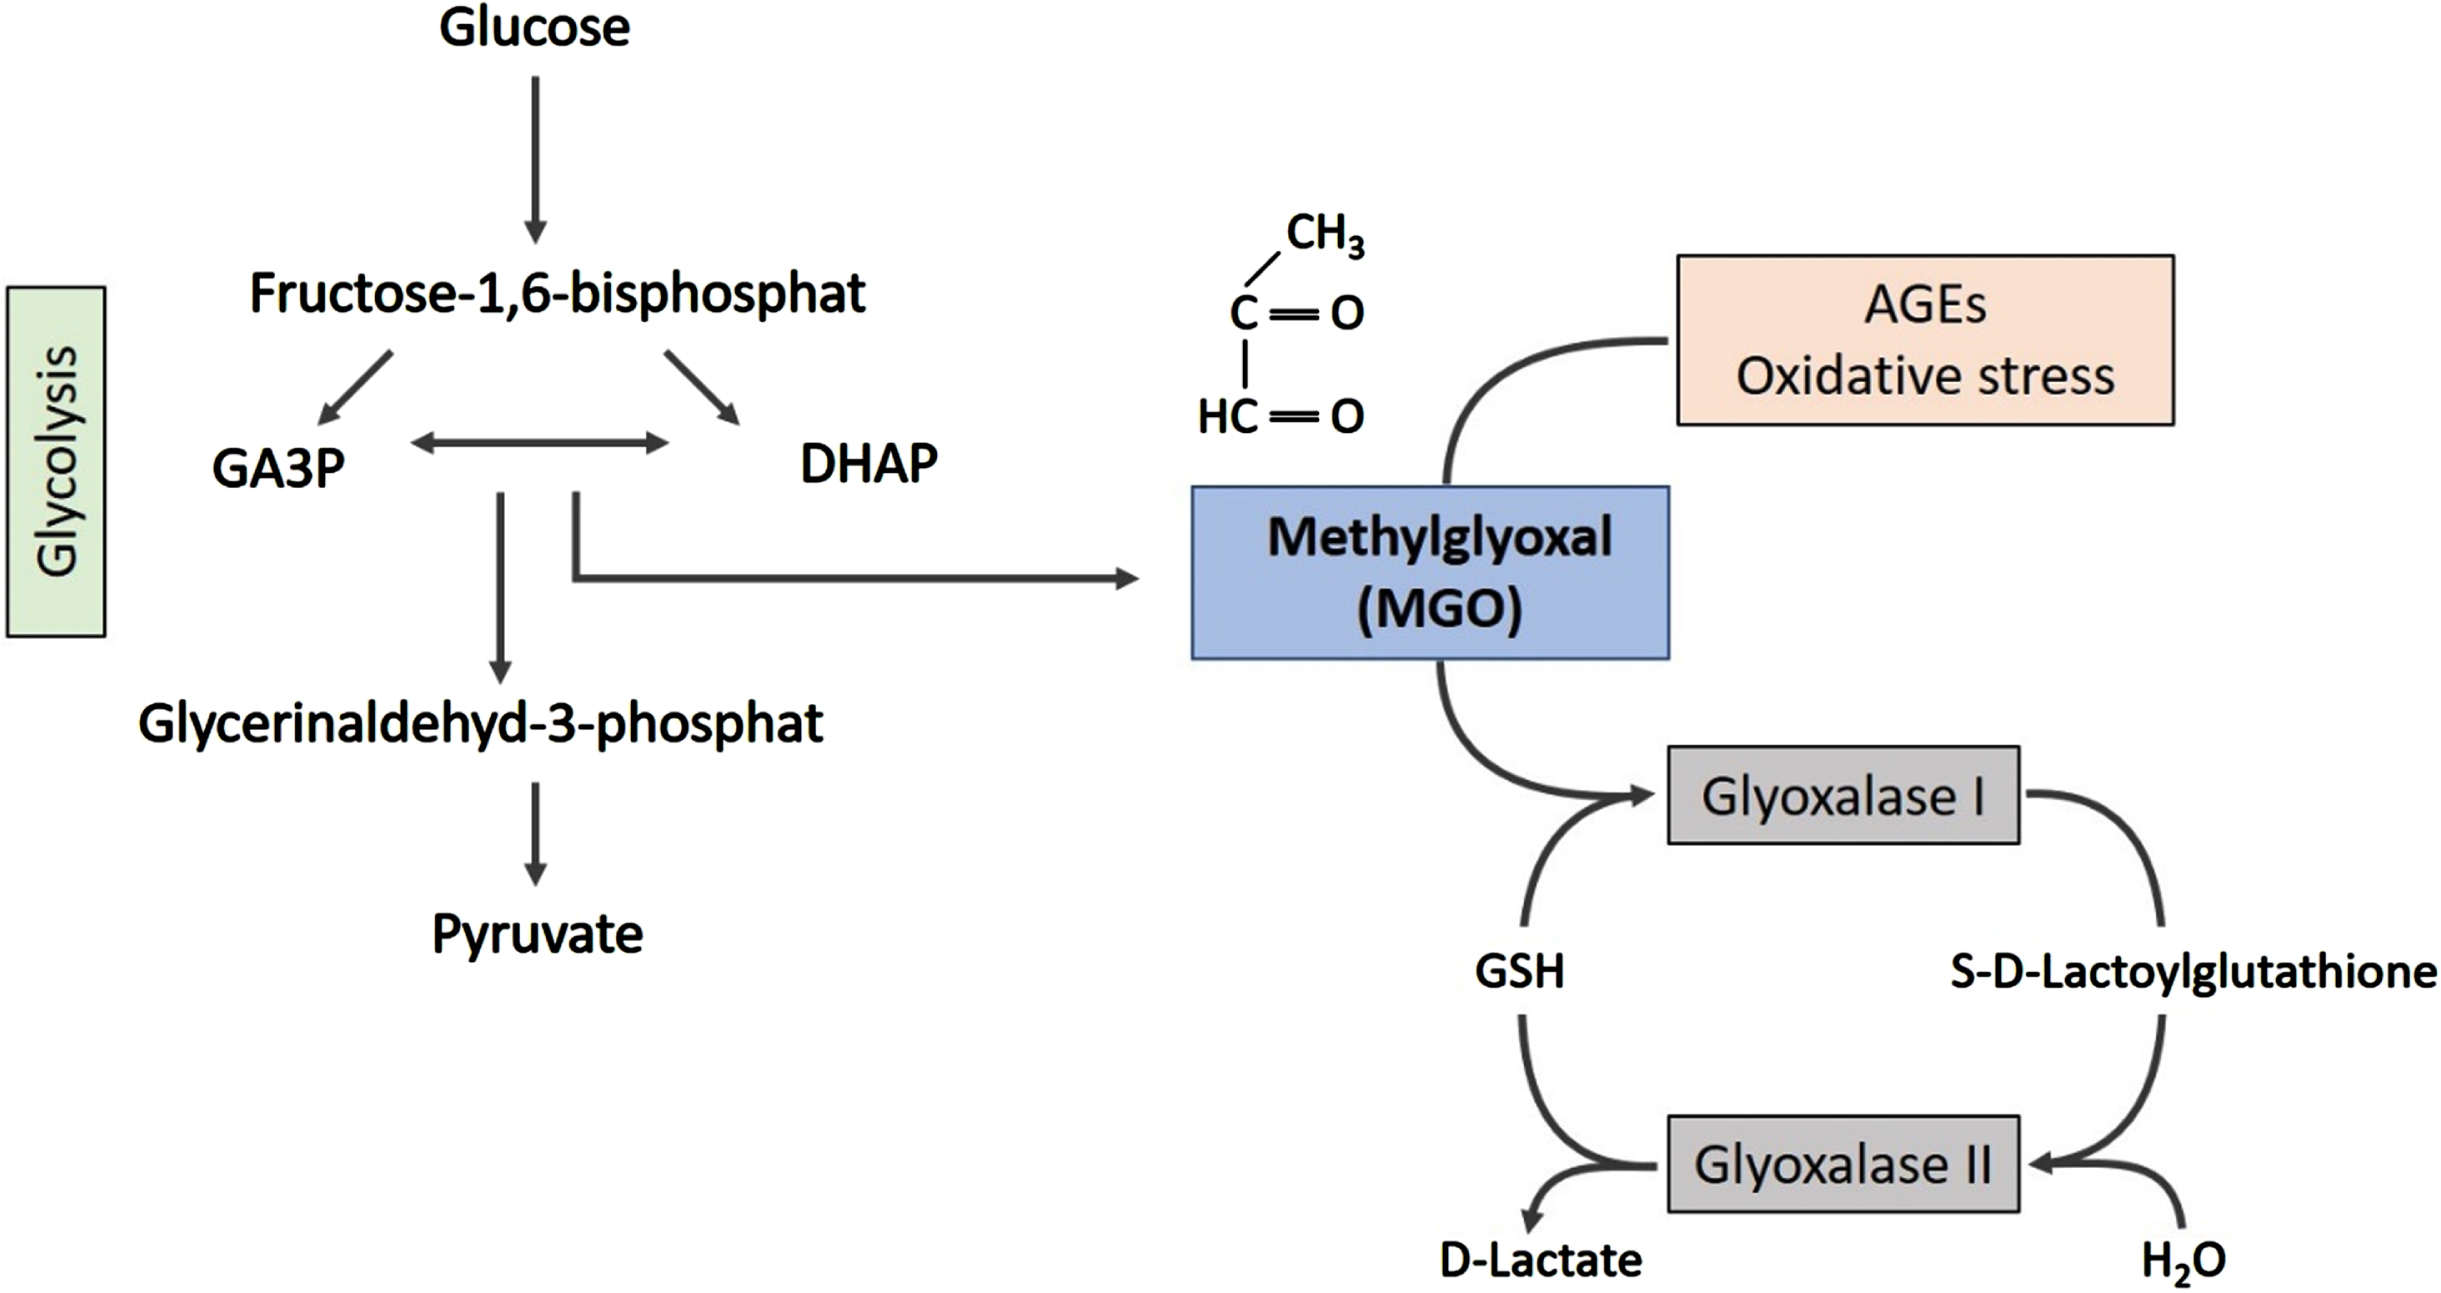 MGO is formed as a side-product of glycolysis. The spontaneous degradation of glyceraldehyde-3-phosphate (GA3P) and dihydroxyacetonephosphate (DHAP) generates MGO. The glyoxalase system, a set of enzymes, is responsible for detoxification of MGO, forming lactate.